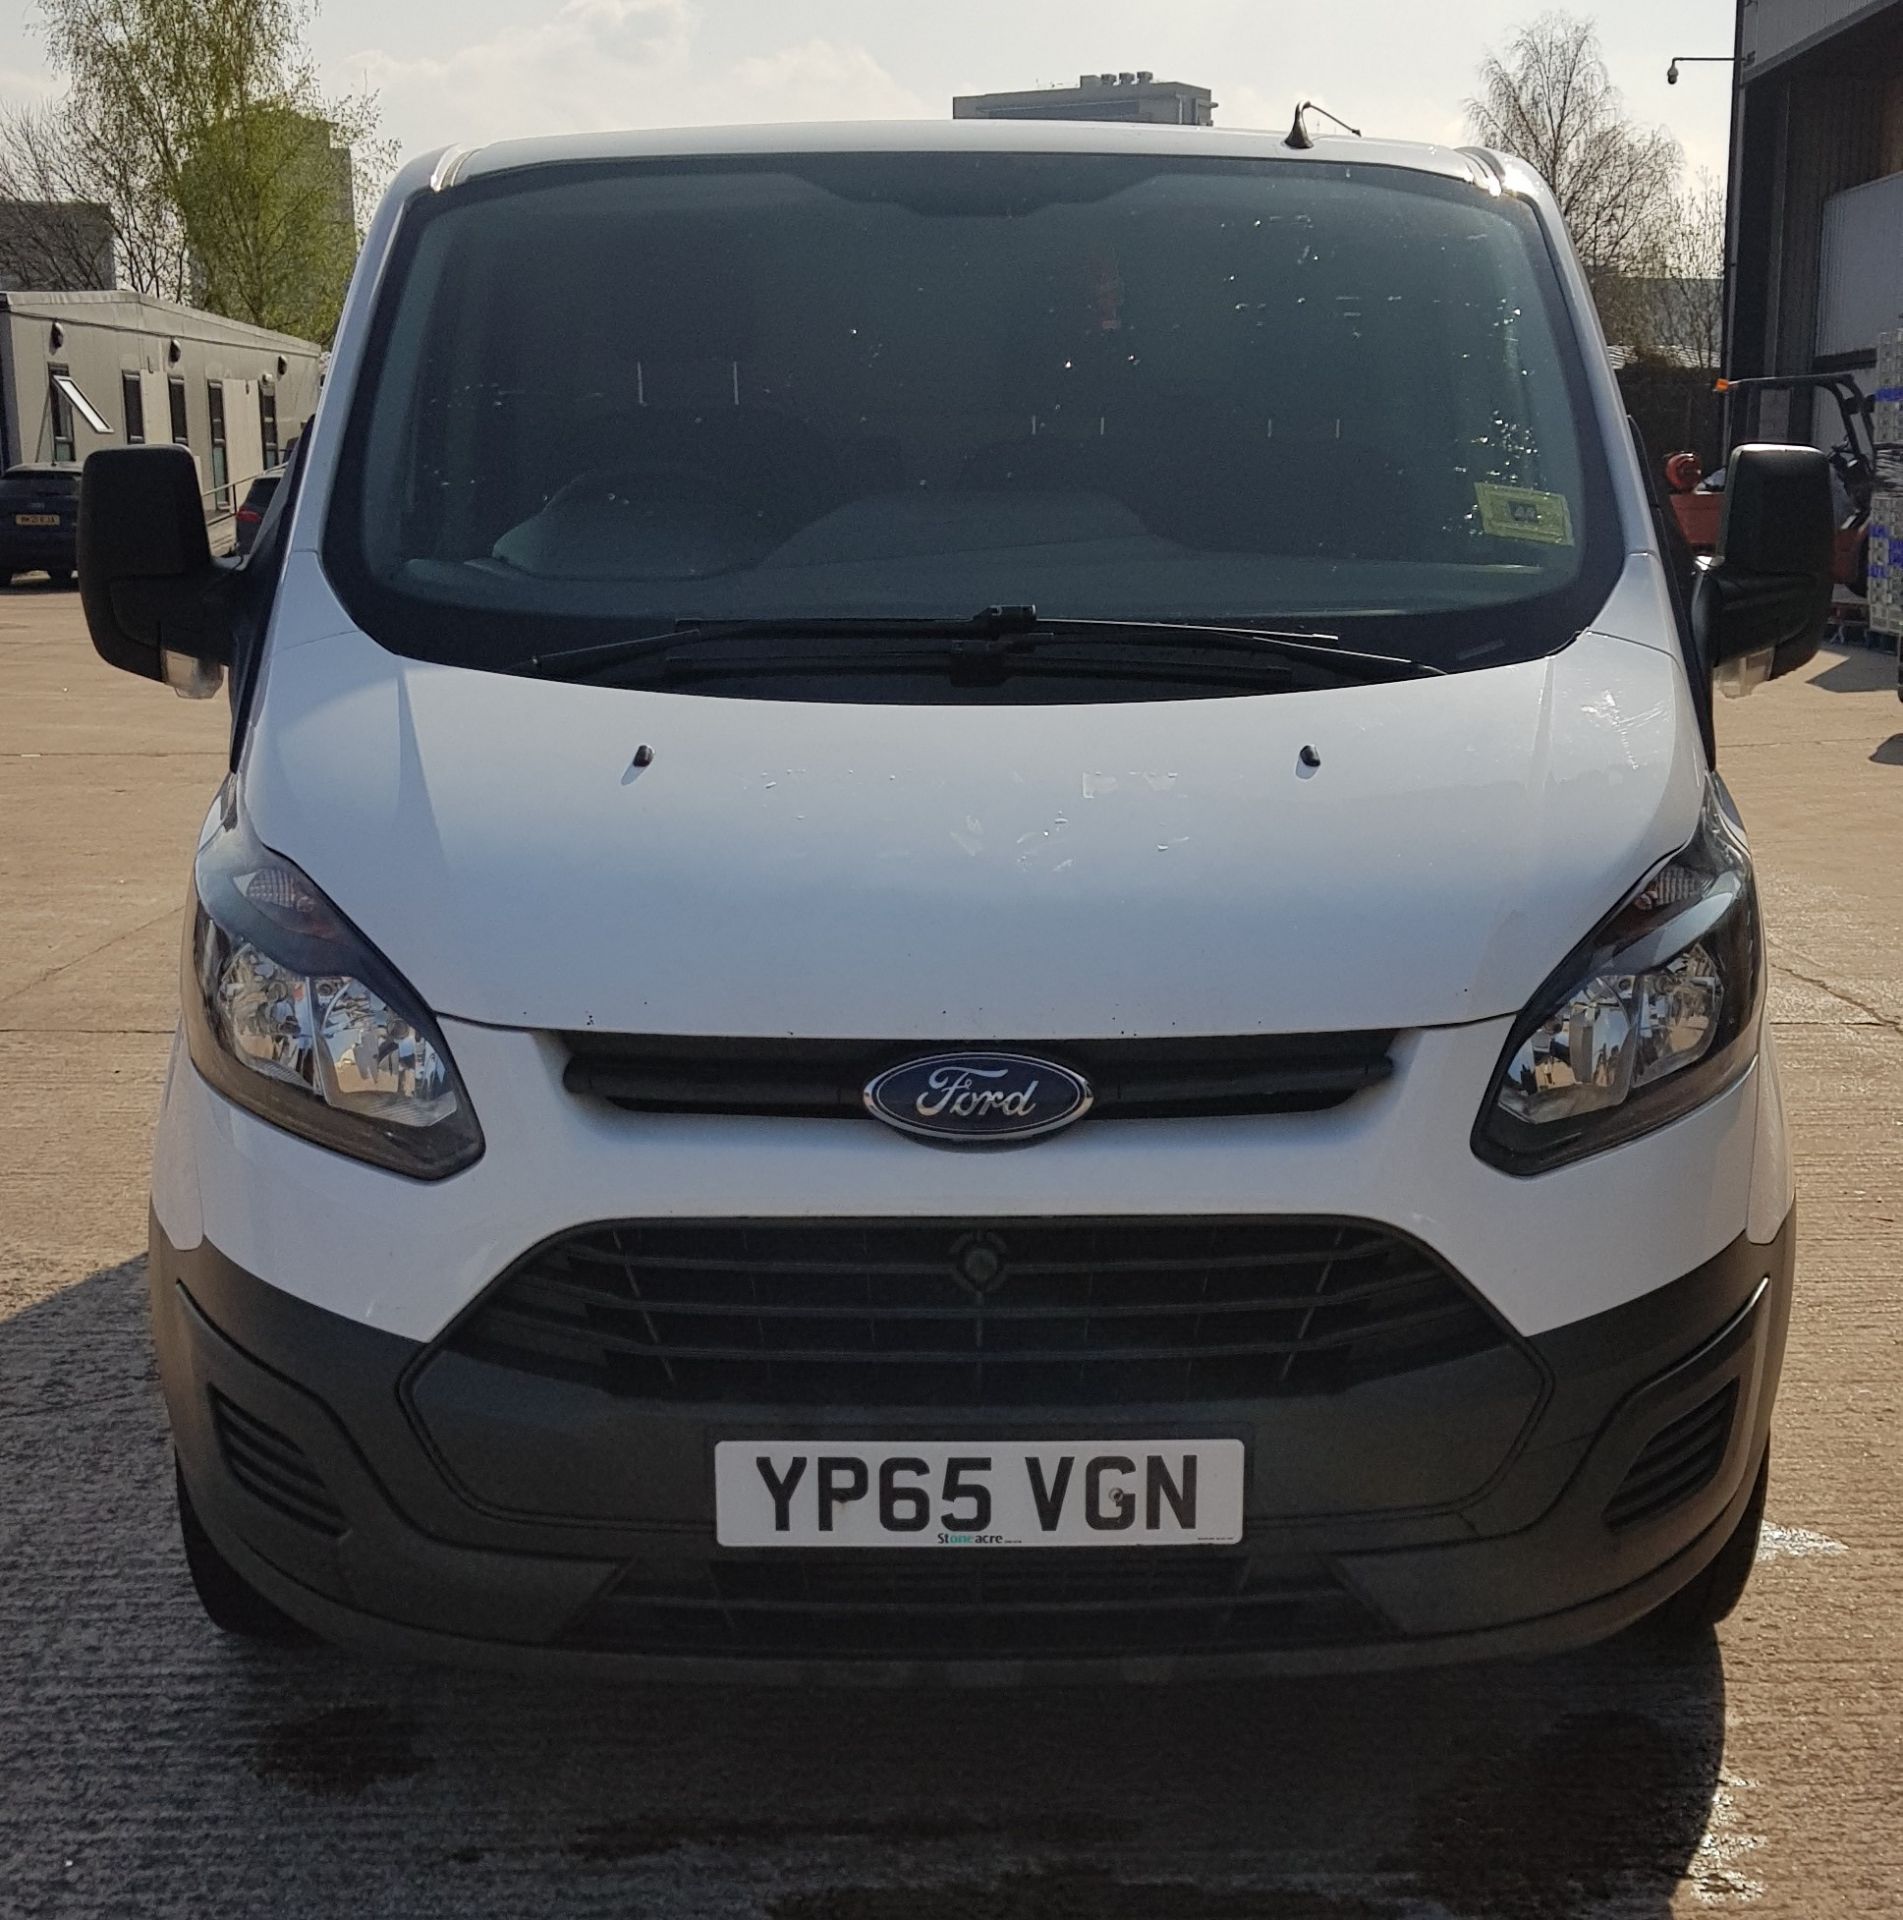 WHITE FORD TRANSIT CUSTOM 270 ECO TECH. ( DIESEL ) Reg : YP65 VGN, Mileage : 93,455 Details: FIRST - Image 6 of 13